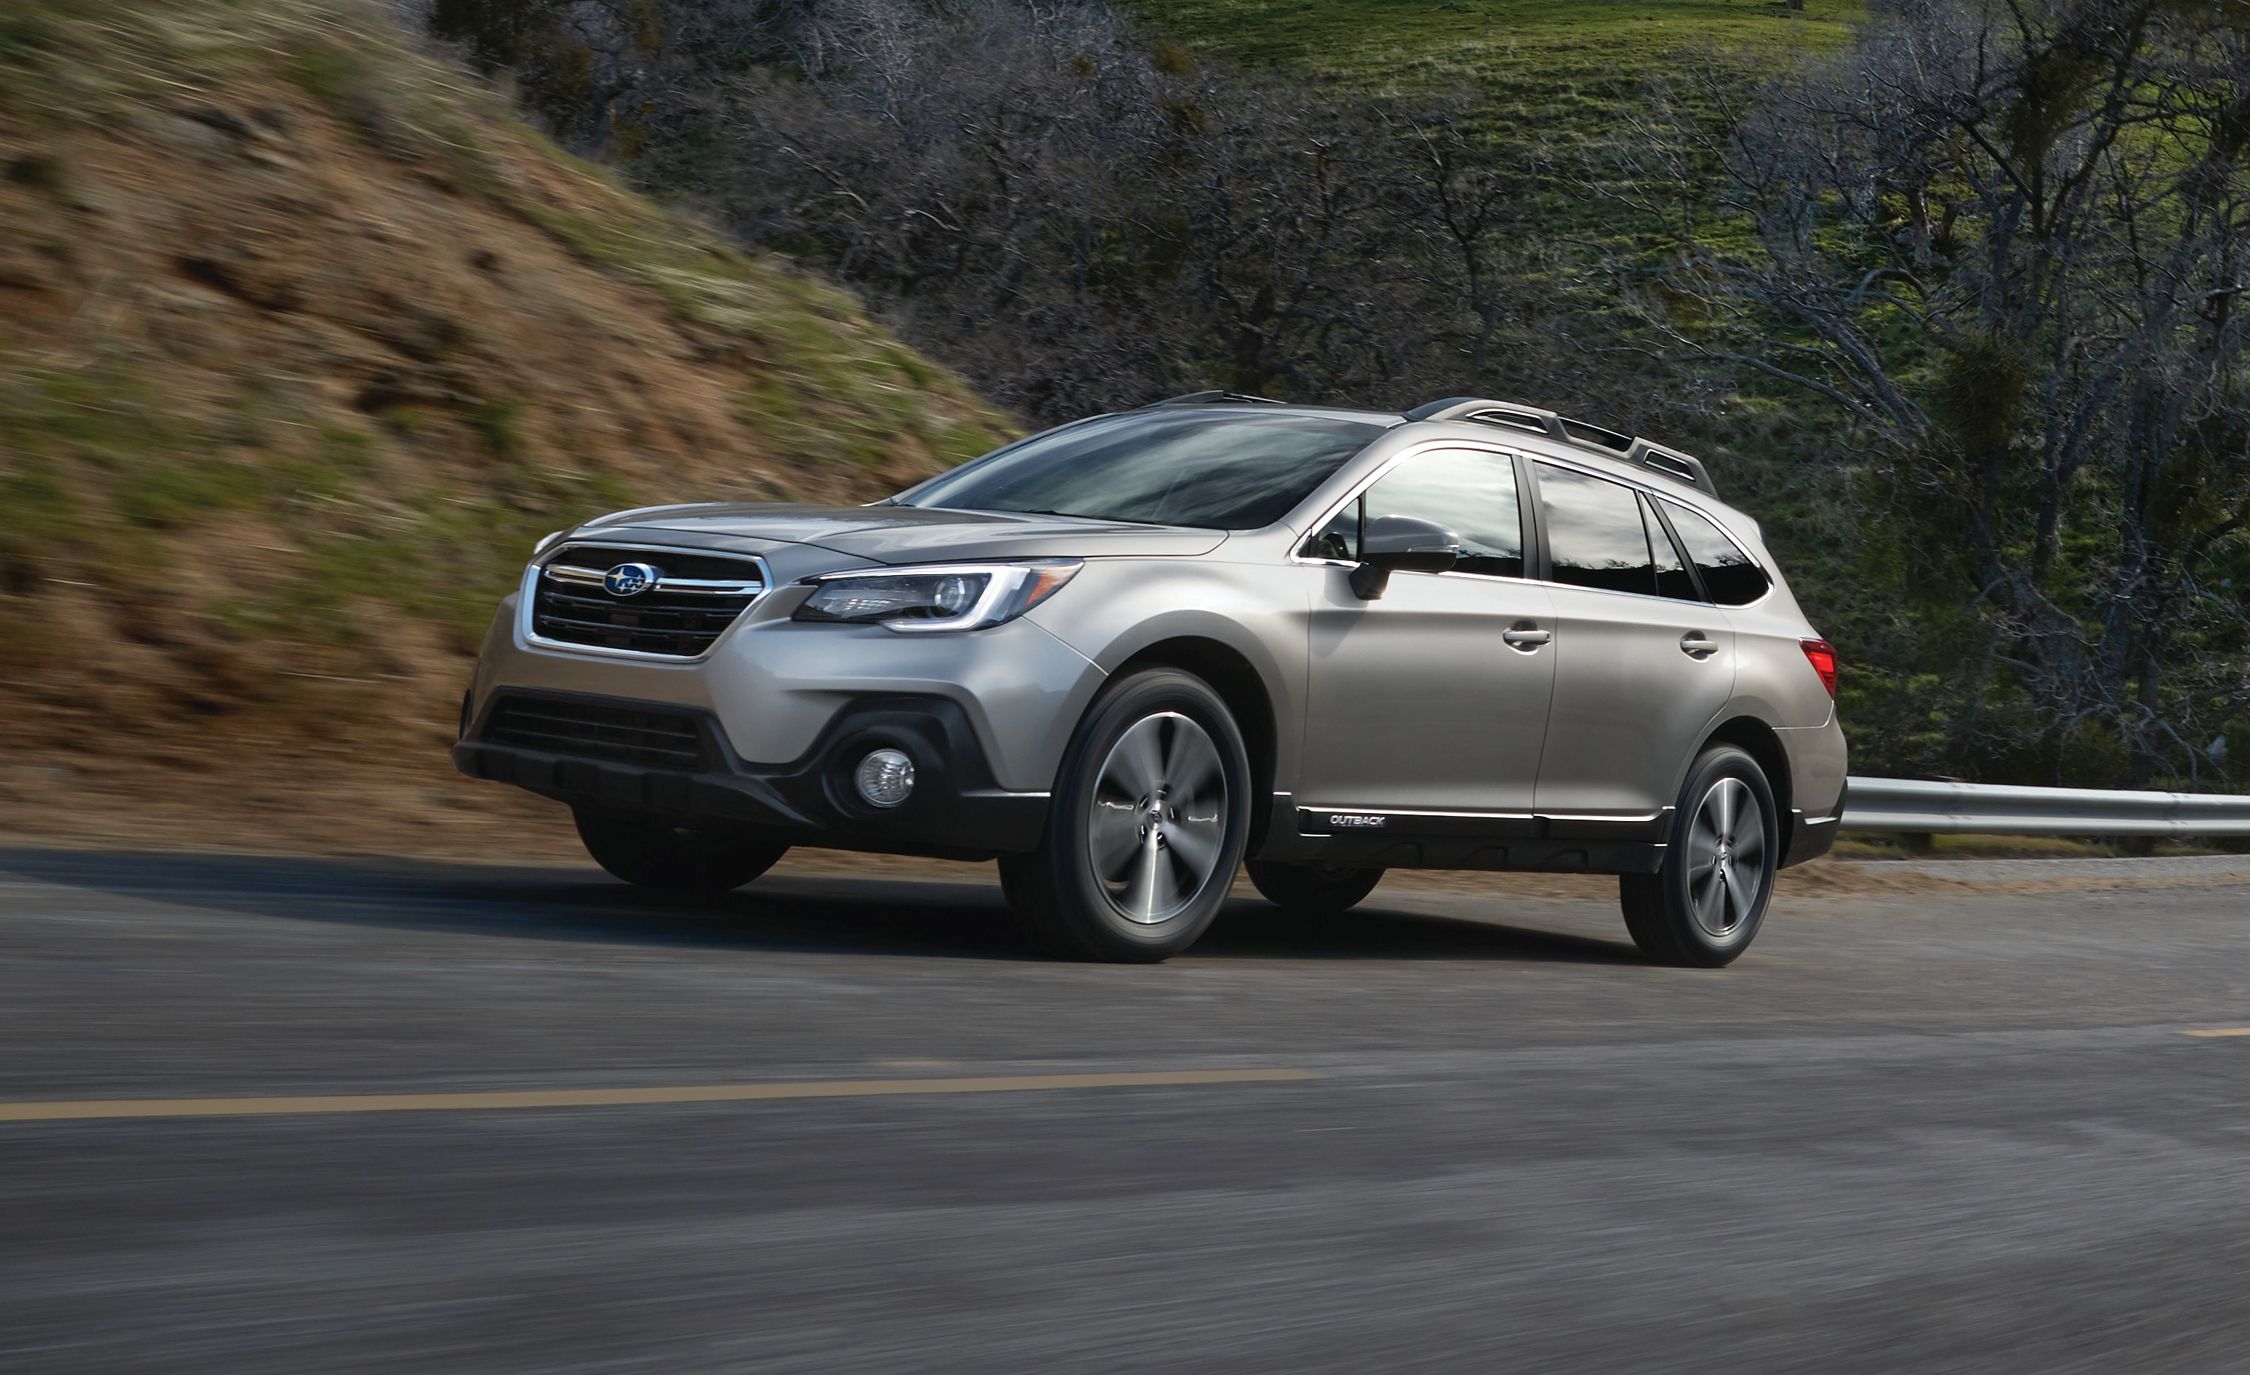 2018 Subaru Outback: Little Things Mean a Lot